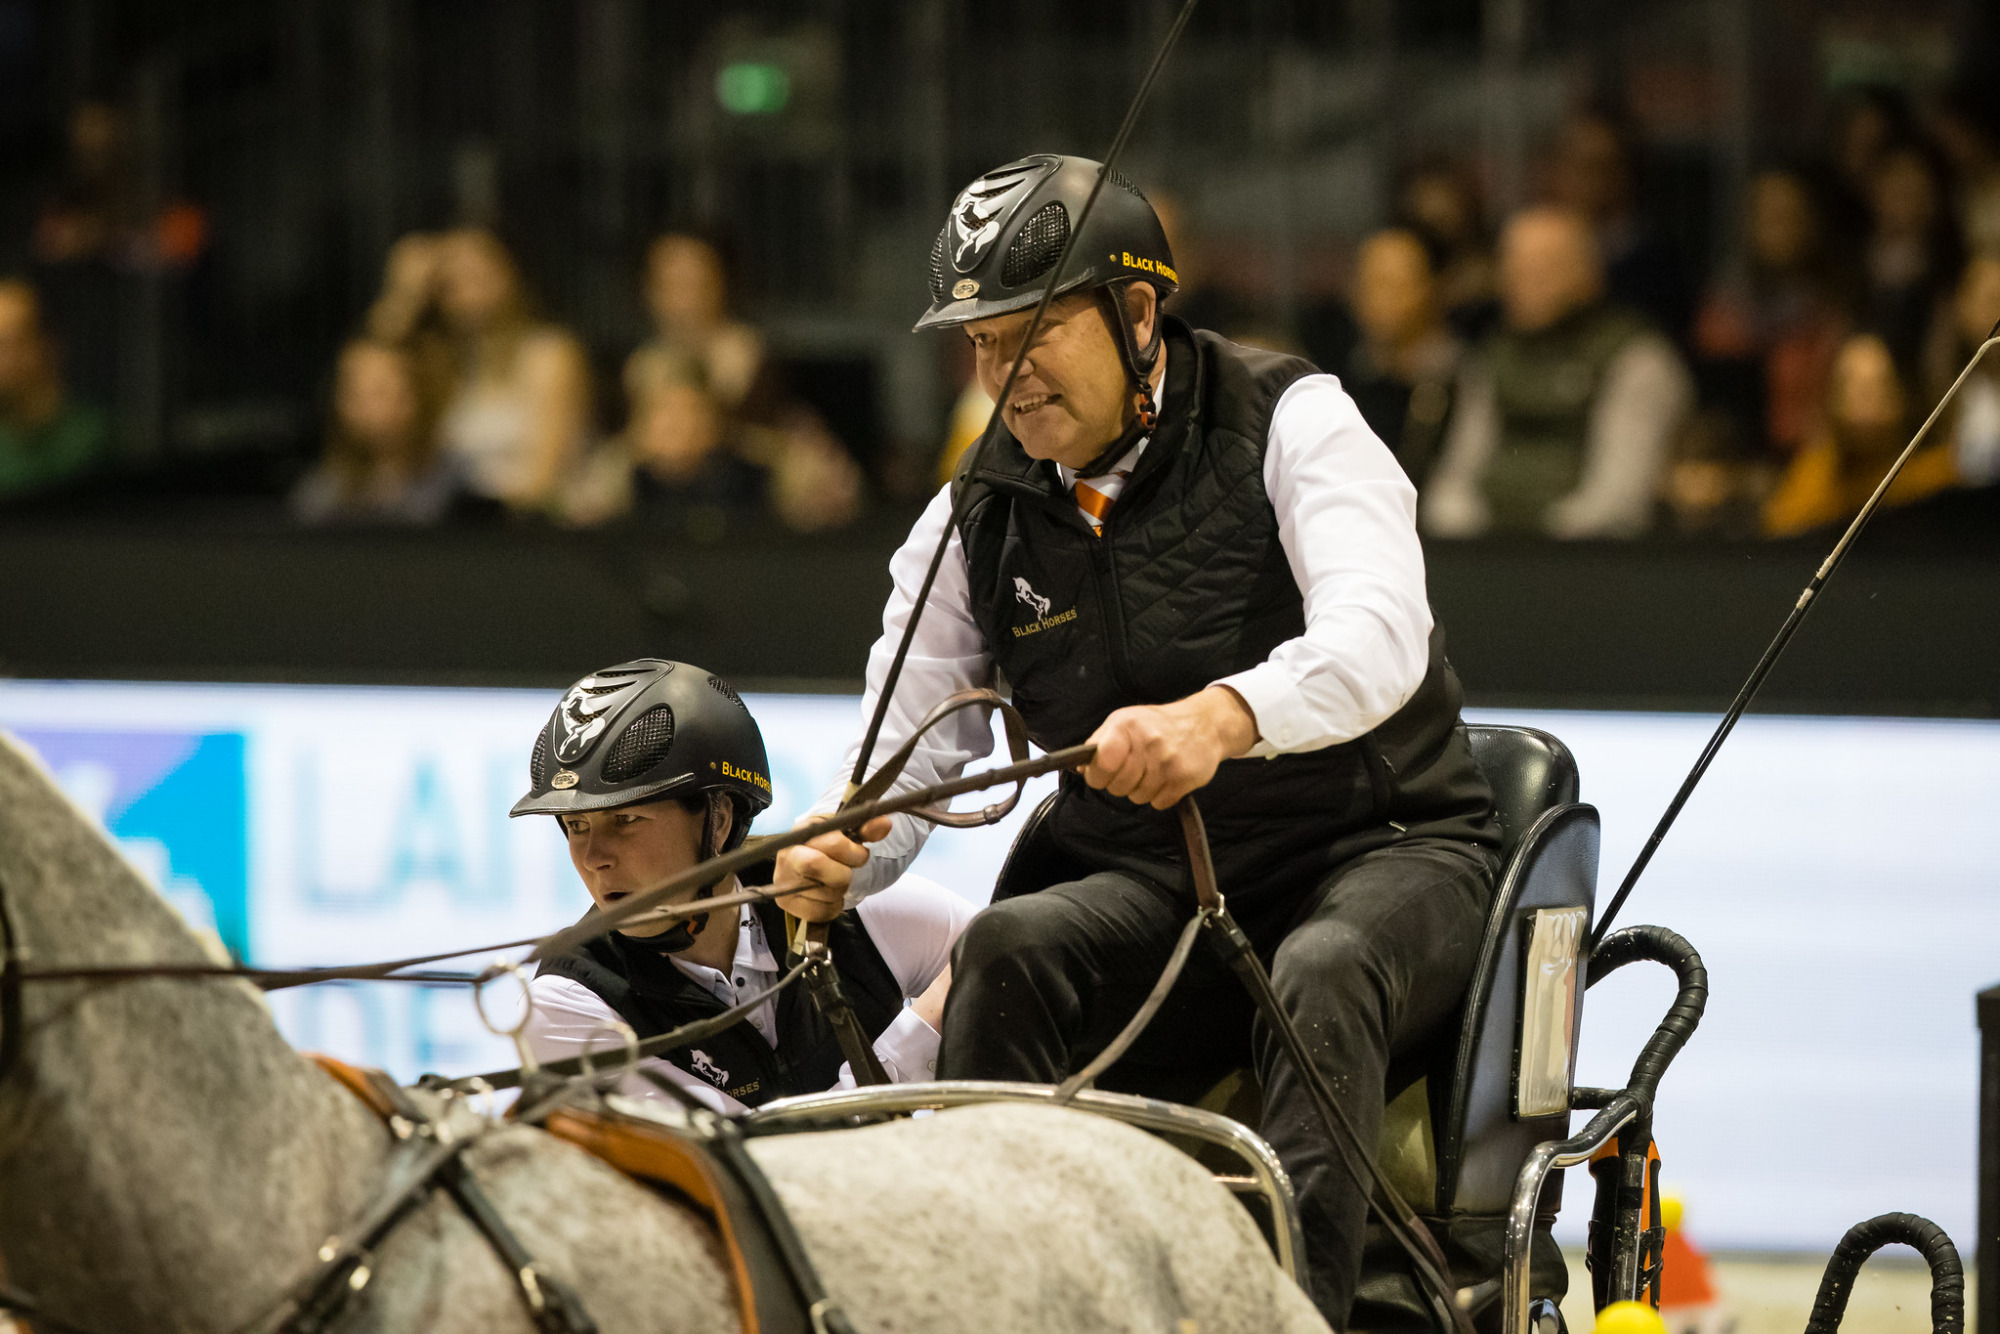 Ijsbrand Chardon (NED) - third place at the FEI Driving World Cup Final 2023 - Bordeaux